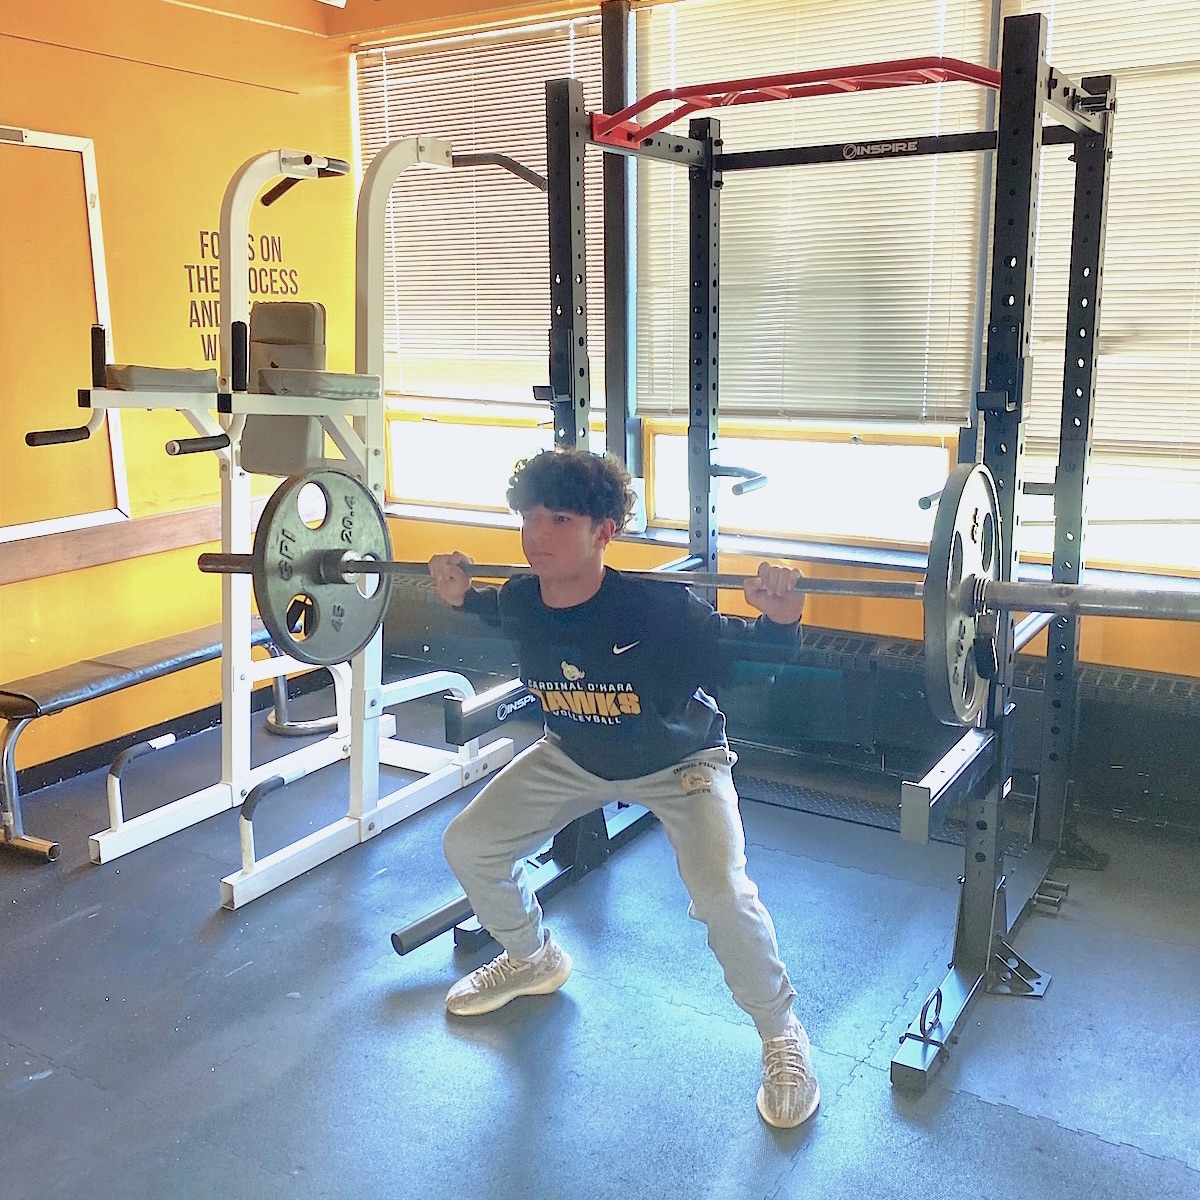 Noah Kreuder tries out a new piece of equipment in the weight/conditioning room. (O'Hara photo)